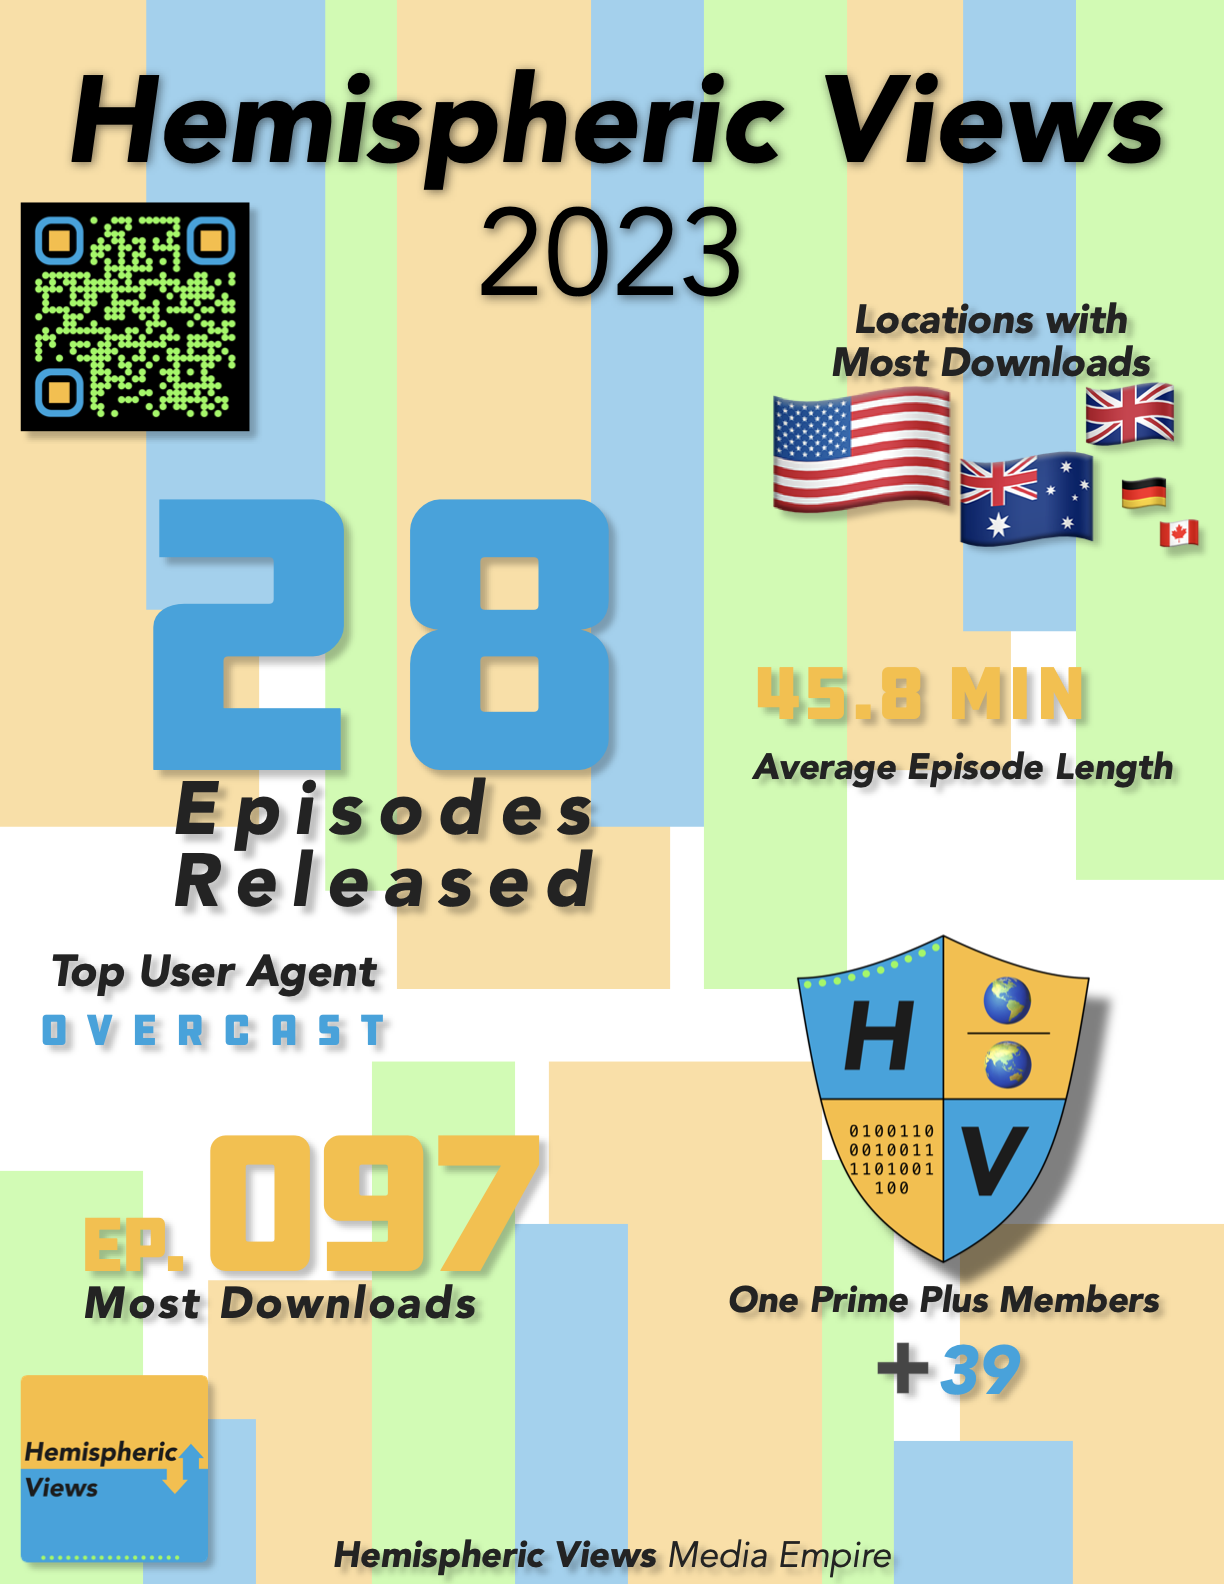 Hemispheric Views — 2023
&10;
&10;Episodes Released: 28  
&10;Most Downloaded Episode: 097  
&10;Average Episode Length: 45.8 Minutes  
&10;Locations with most downloads: 🇺🇸, 🇦🇺, 🇬🇧, 🇩🇪, 🇨🇦  
&10;Top User Agent: Overcast  
&10;One Prime Plus Members Added: 39  